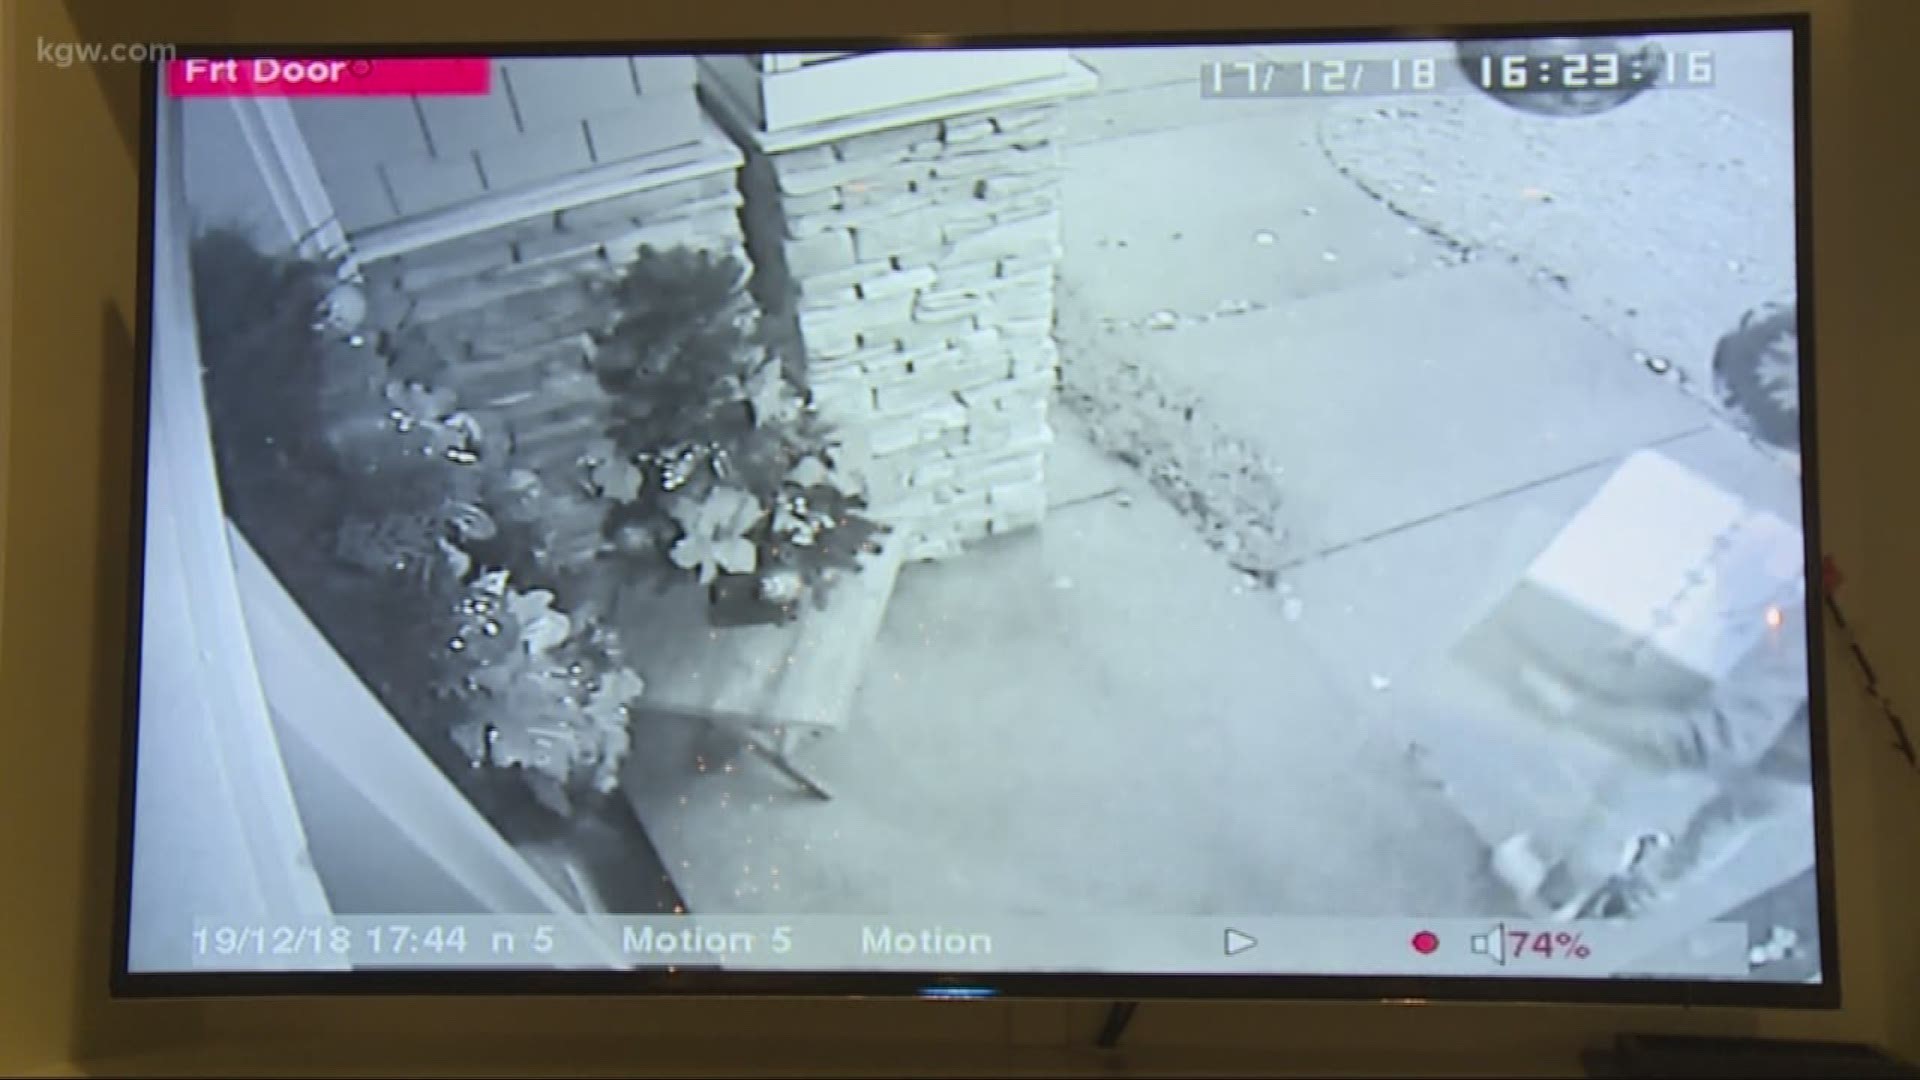 Surveillance video from a home in Lake Oswego appears to show a child steal a package off the a porch. "It's disheartening to think that's someone's holiday tradition being created," says the homeowner.